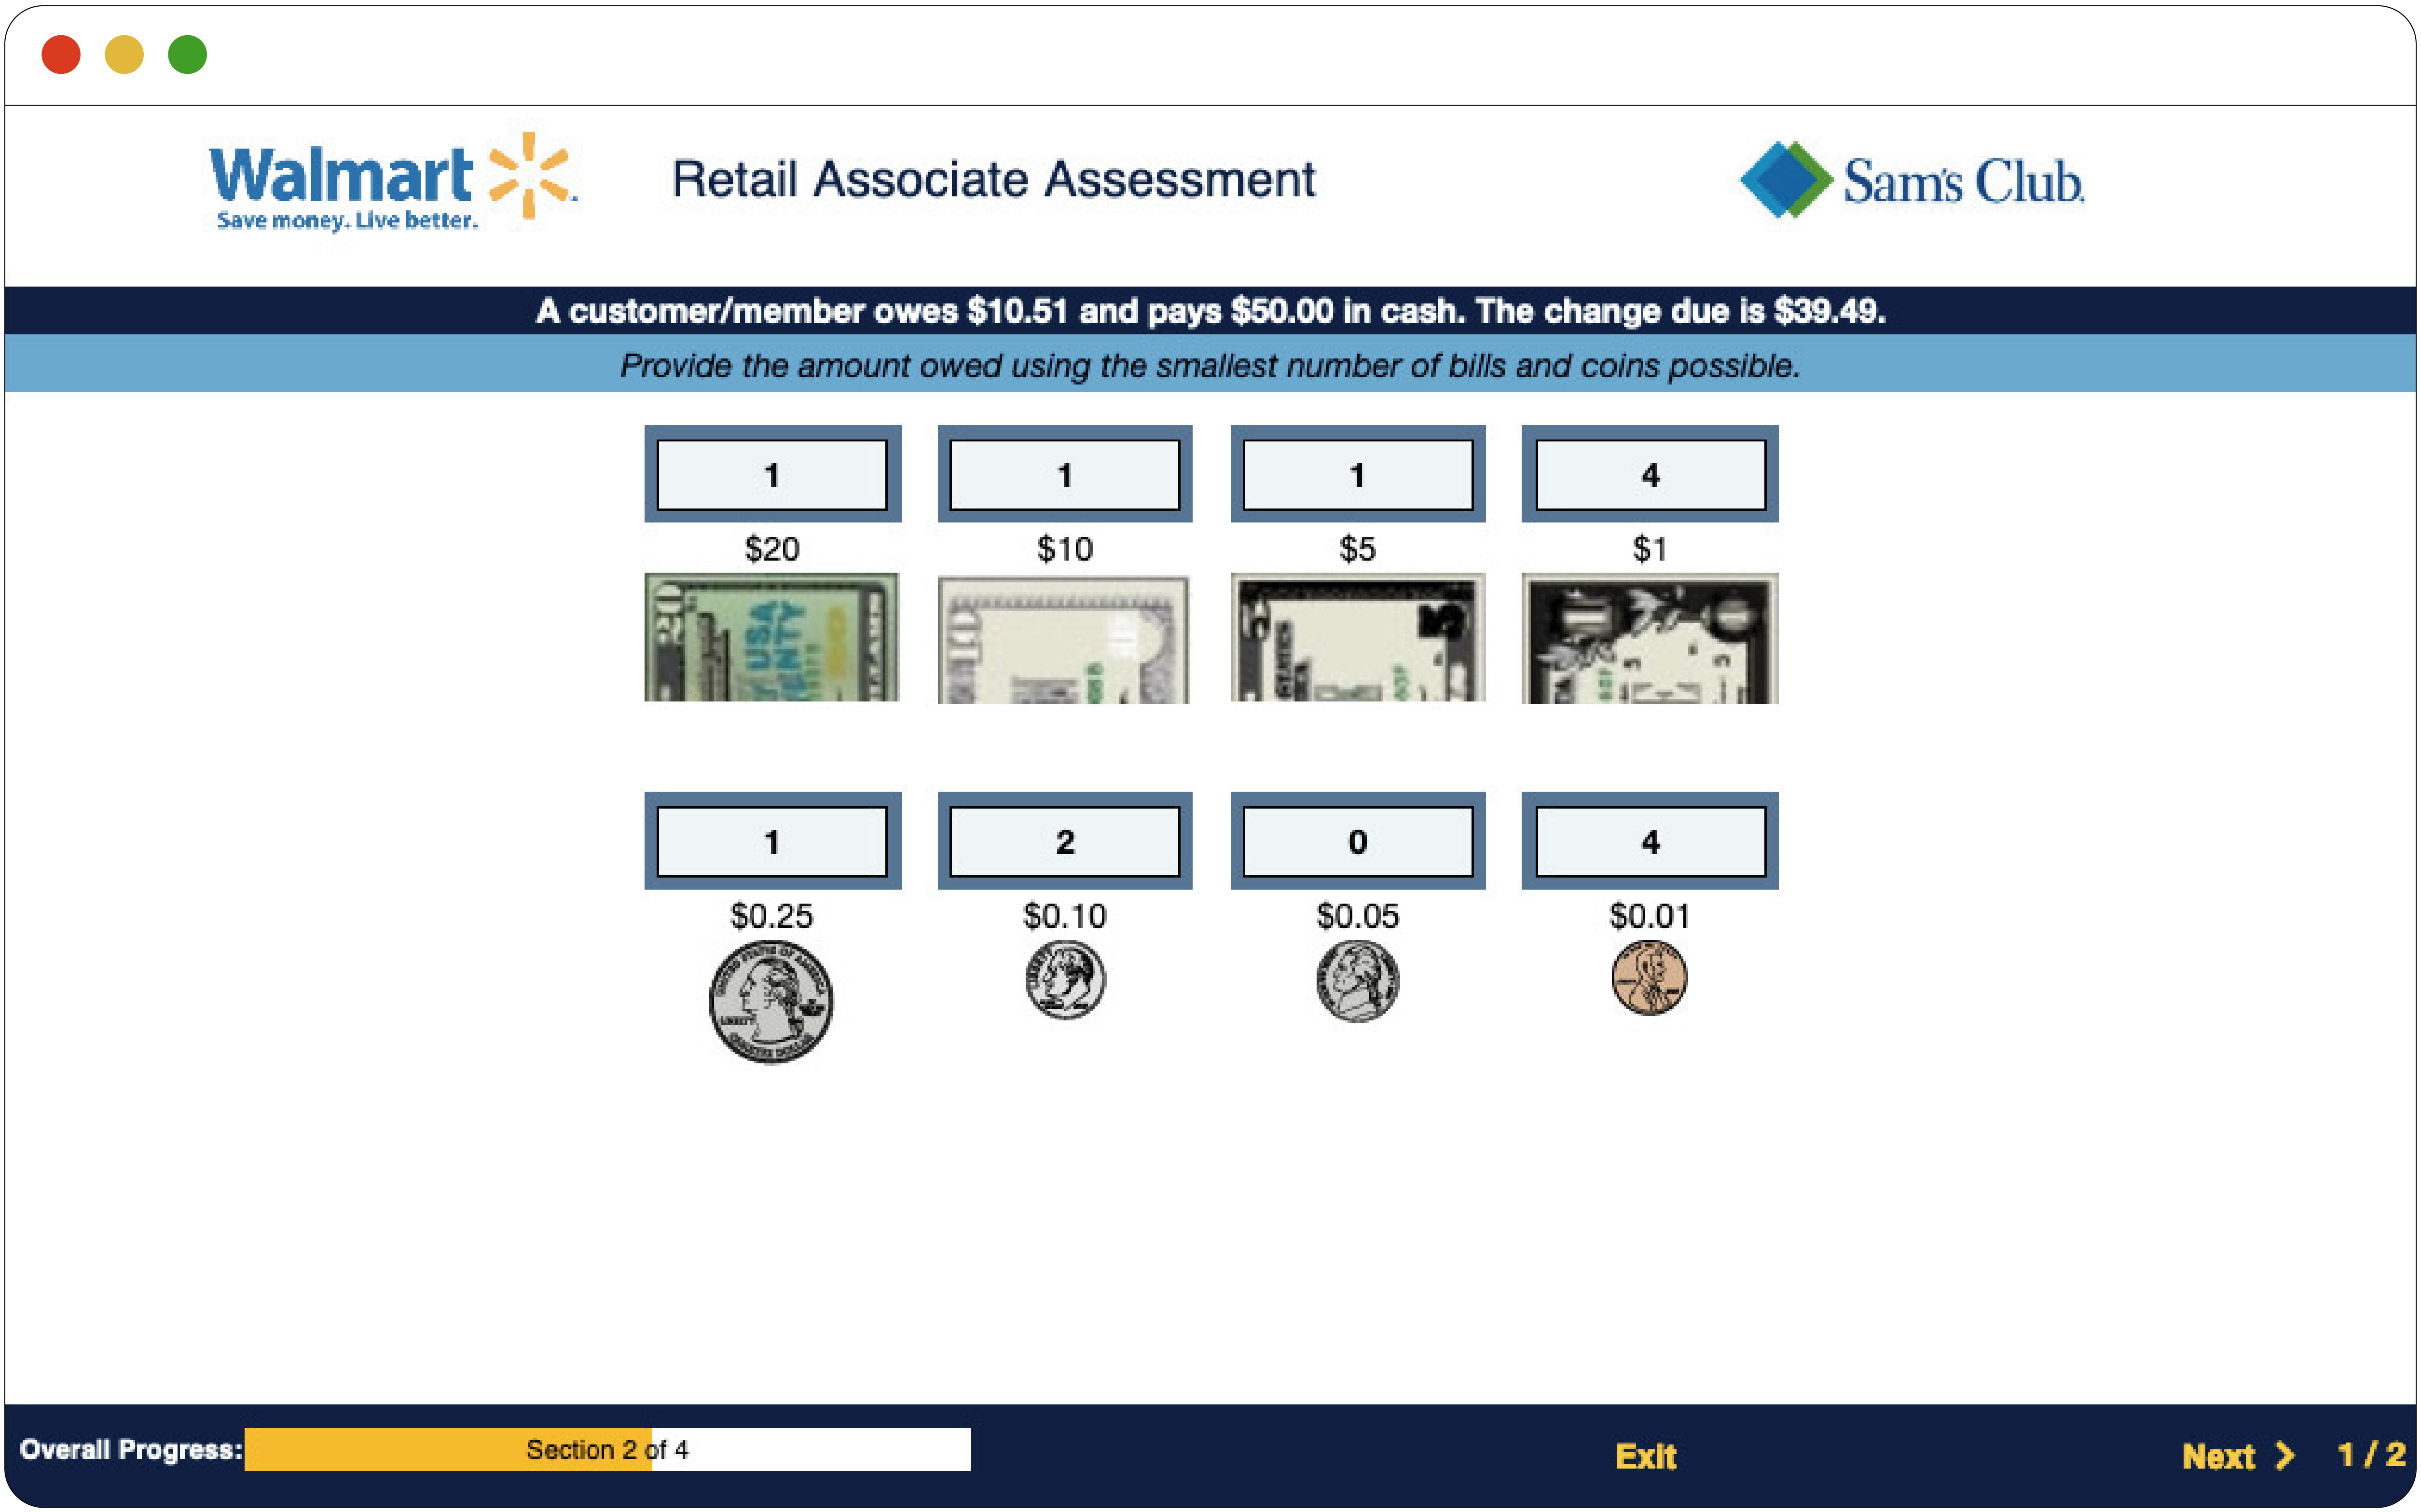 This figure shows a question from Walmart’s change counting skills test. It asks “A customer/member owes $10.51 and pays $50.00 in cash. The change due is $39.49. Provide the amount owed using the smallest number of bills and coins possible.” The candidate is presented with coins and bills up to $20, and can indicate the number that they would return to the customer.